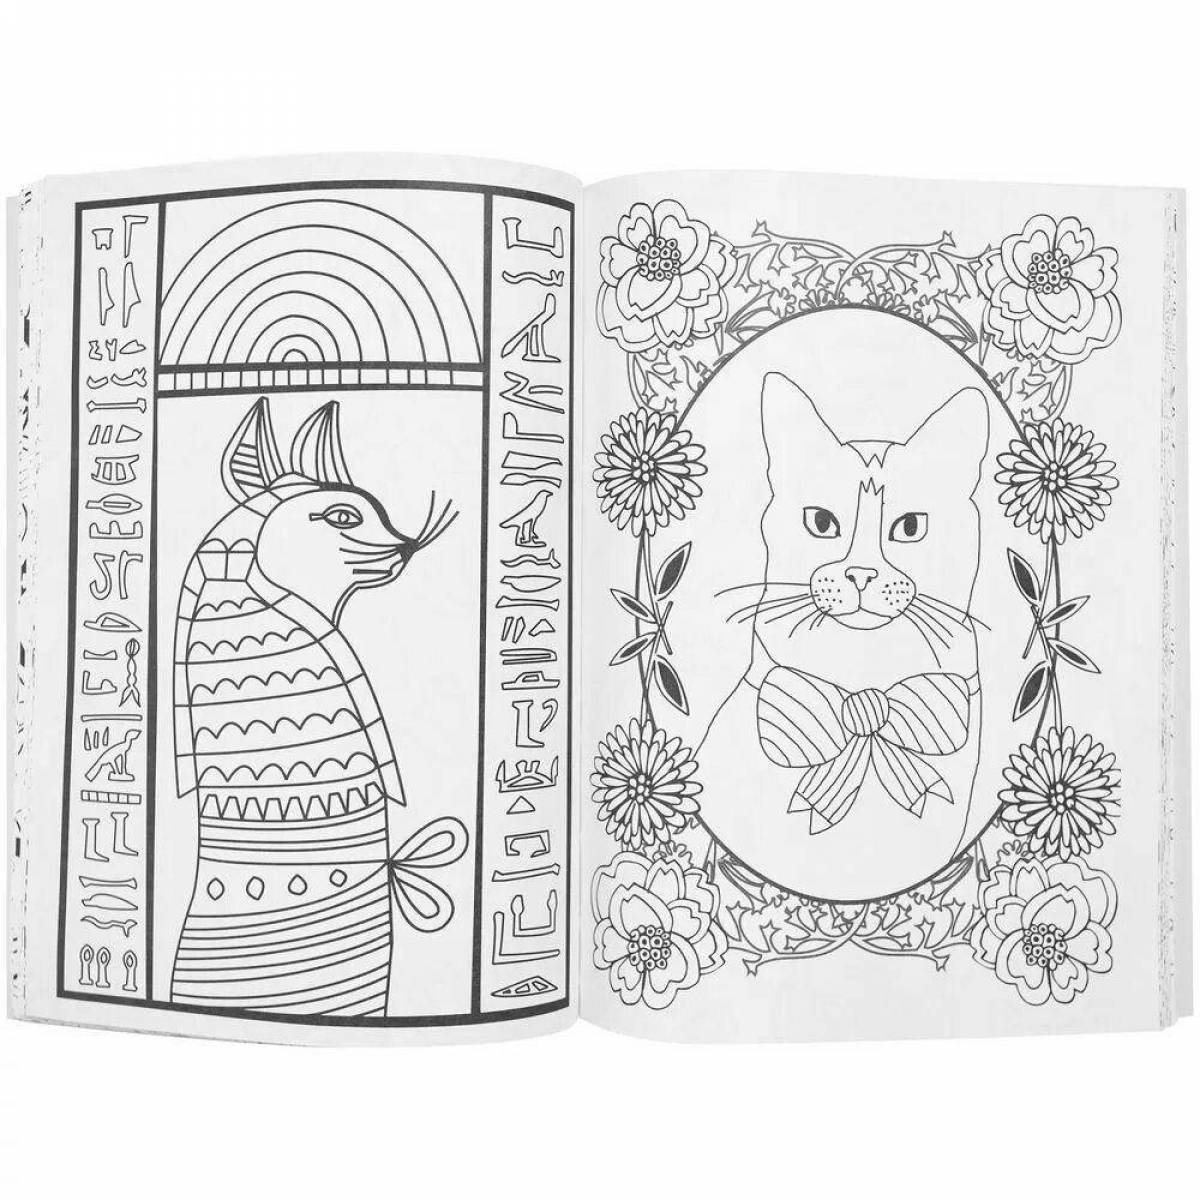 Coloring book antistress brilliant cat therapy